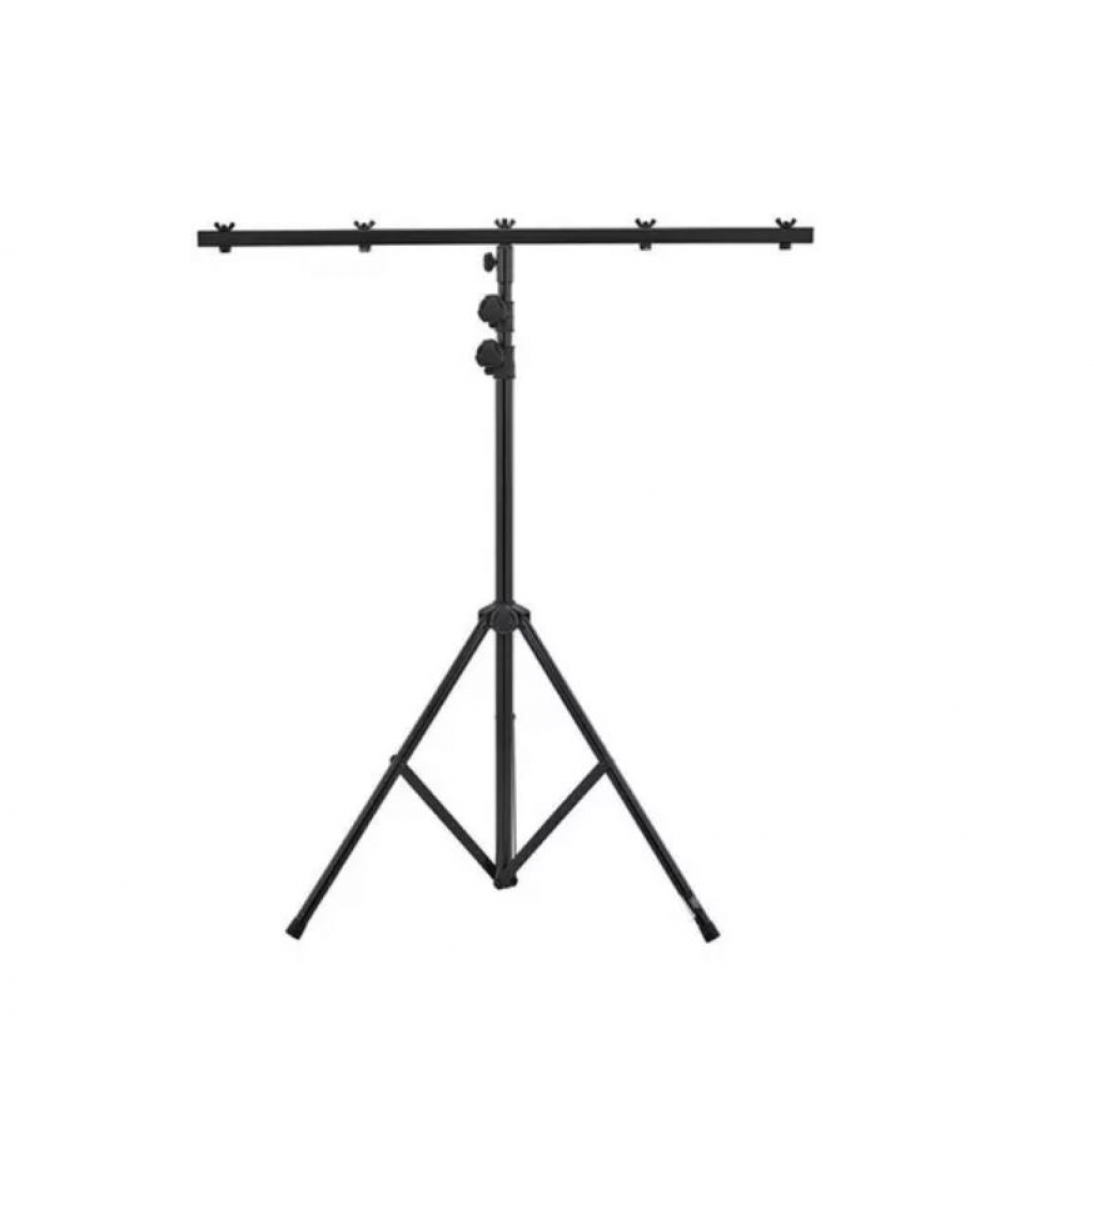 LTS-6 AS Lighting Stand